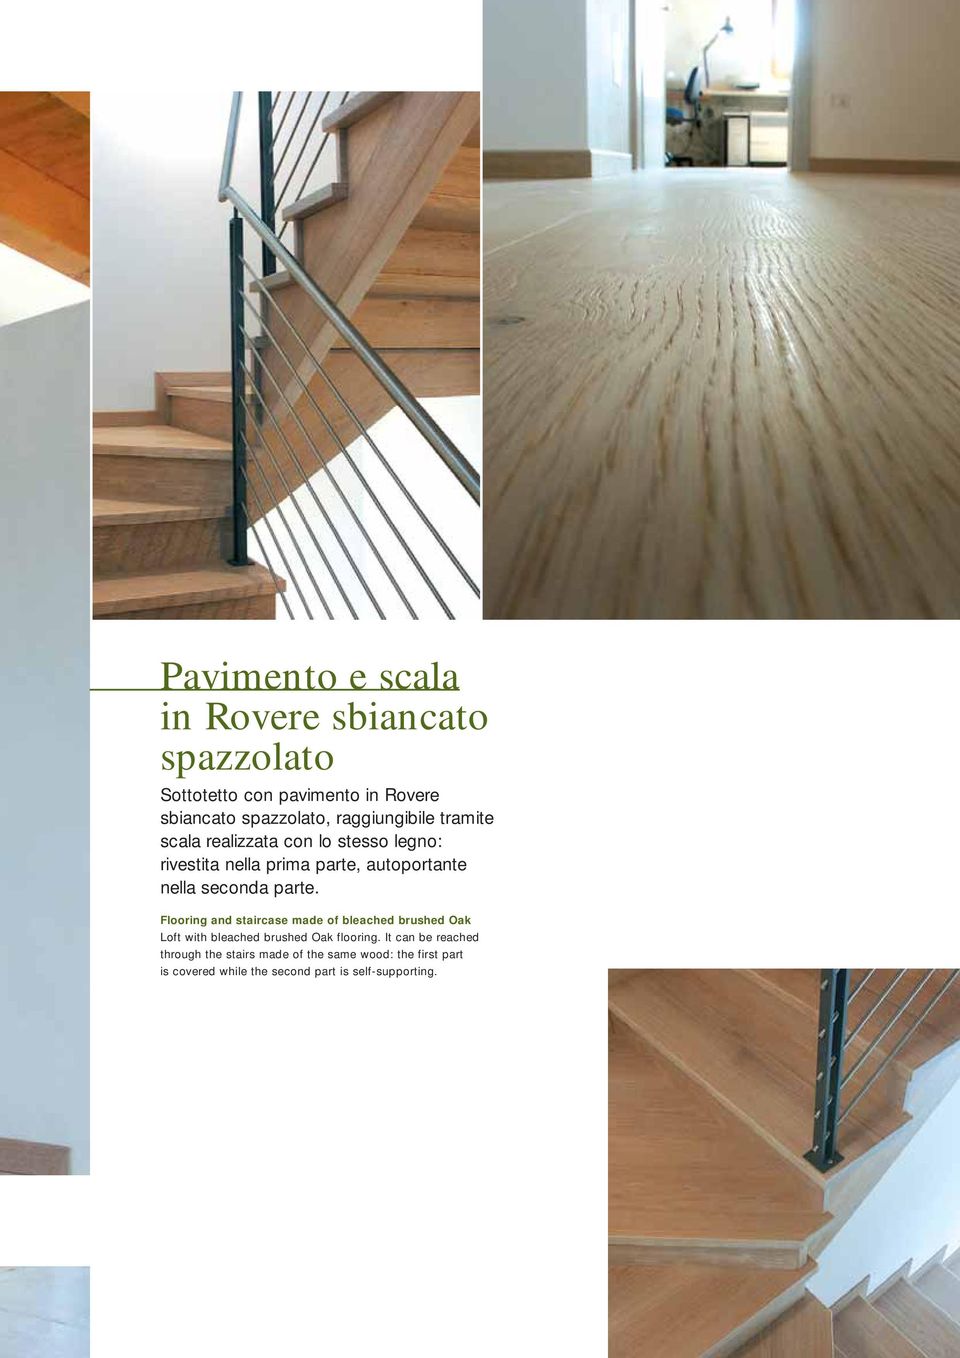 seconda parte. Flooring and staircase made of bleached brushed Oak Loft with bleached brushed Oak flooring.